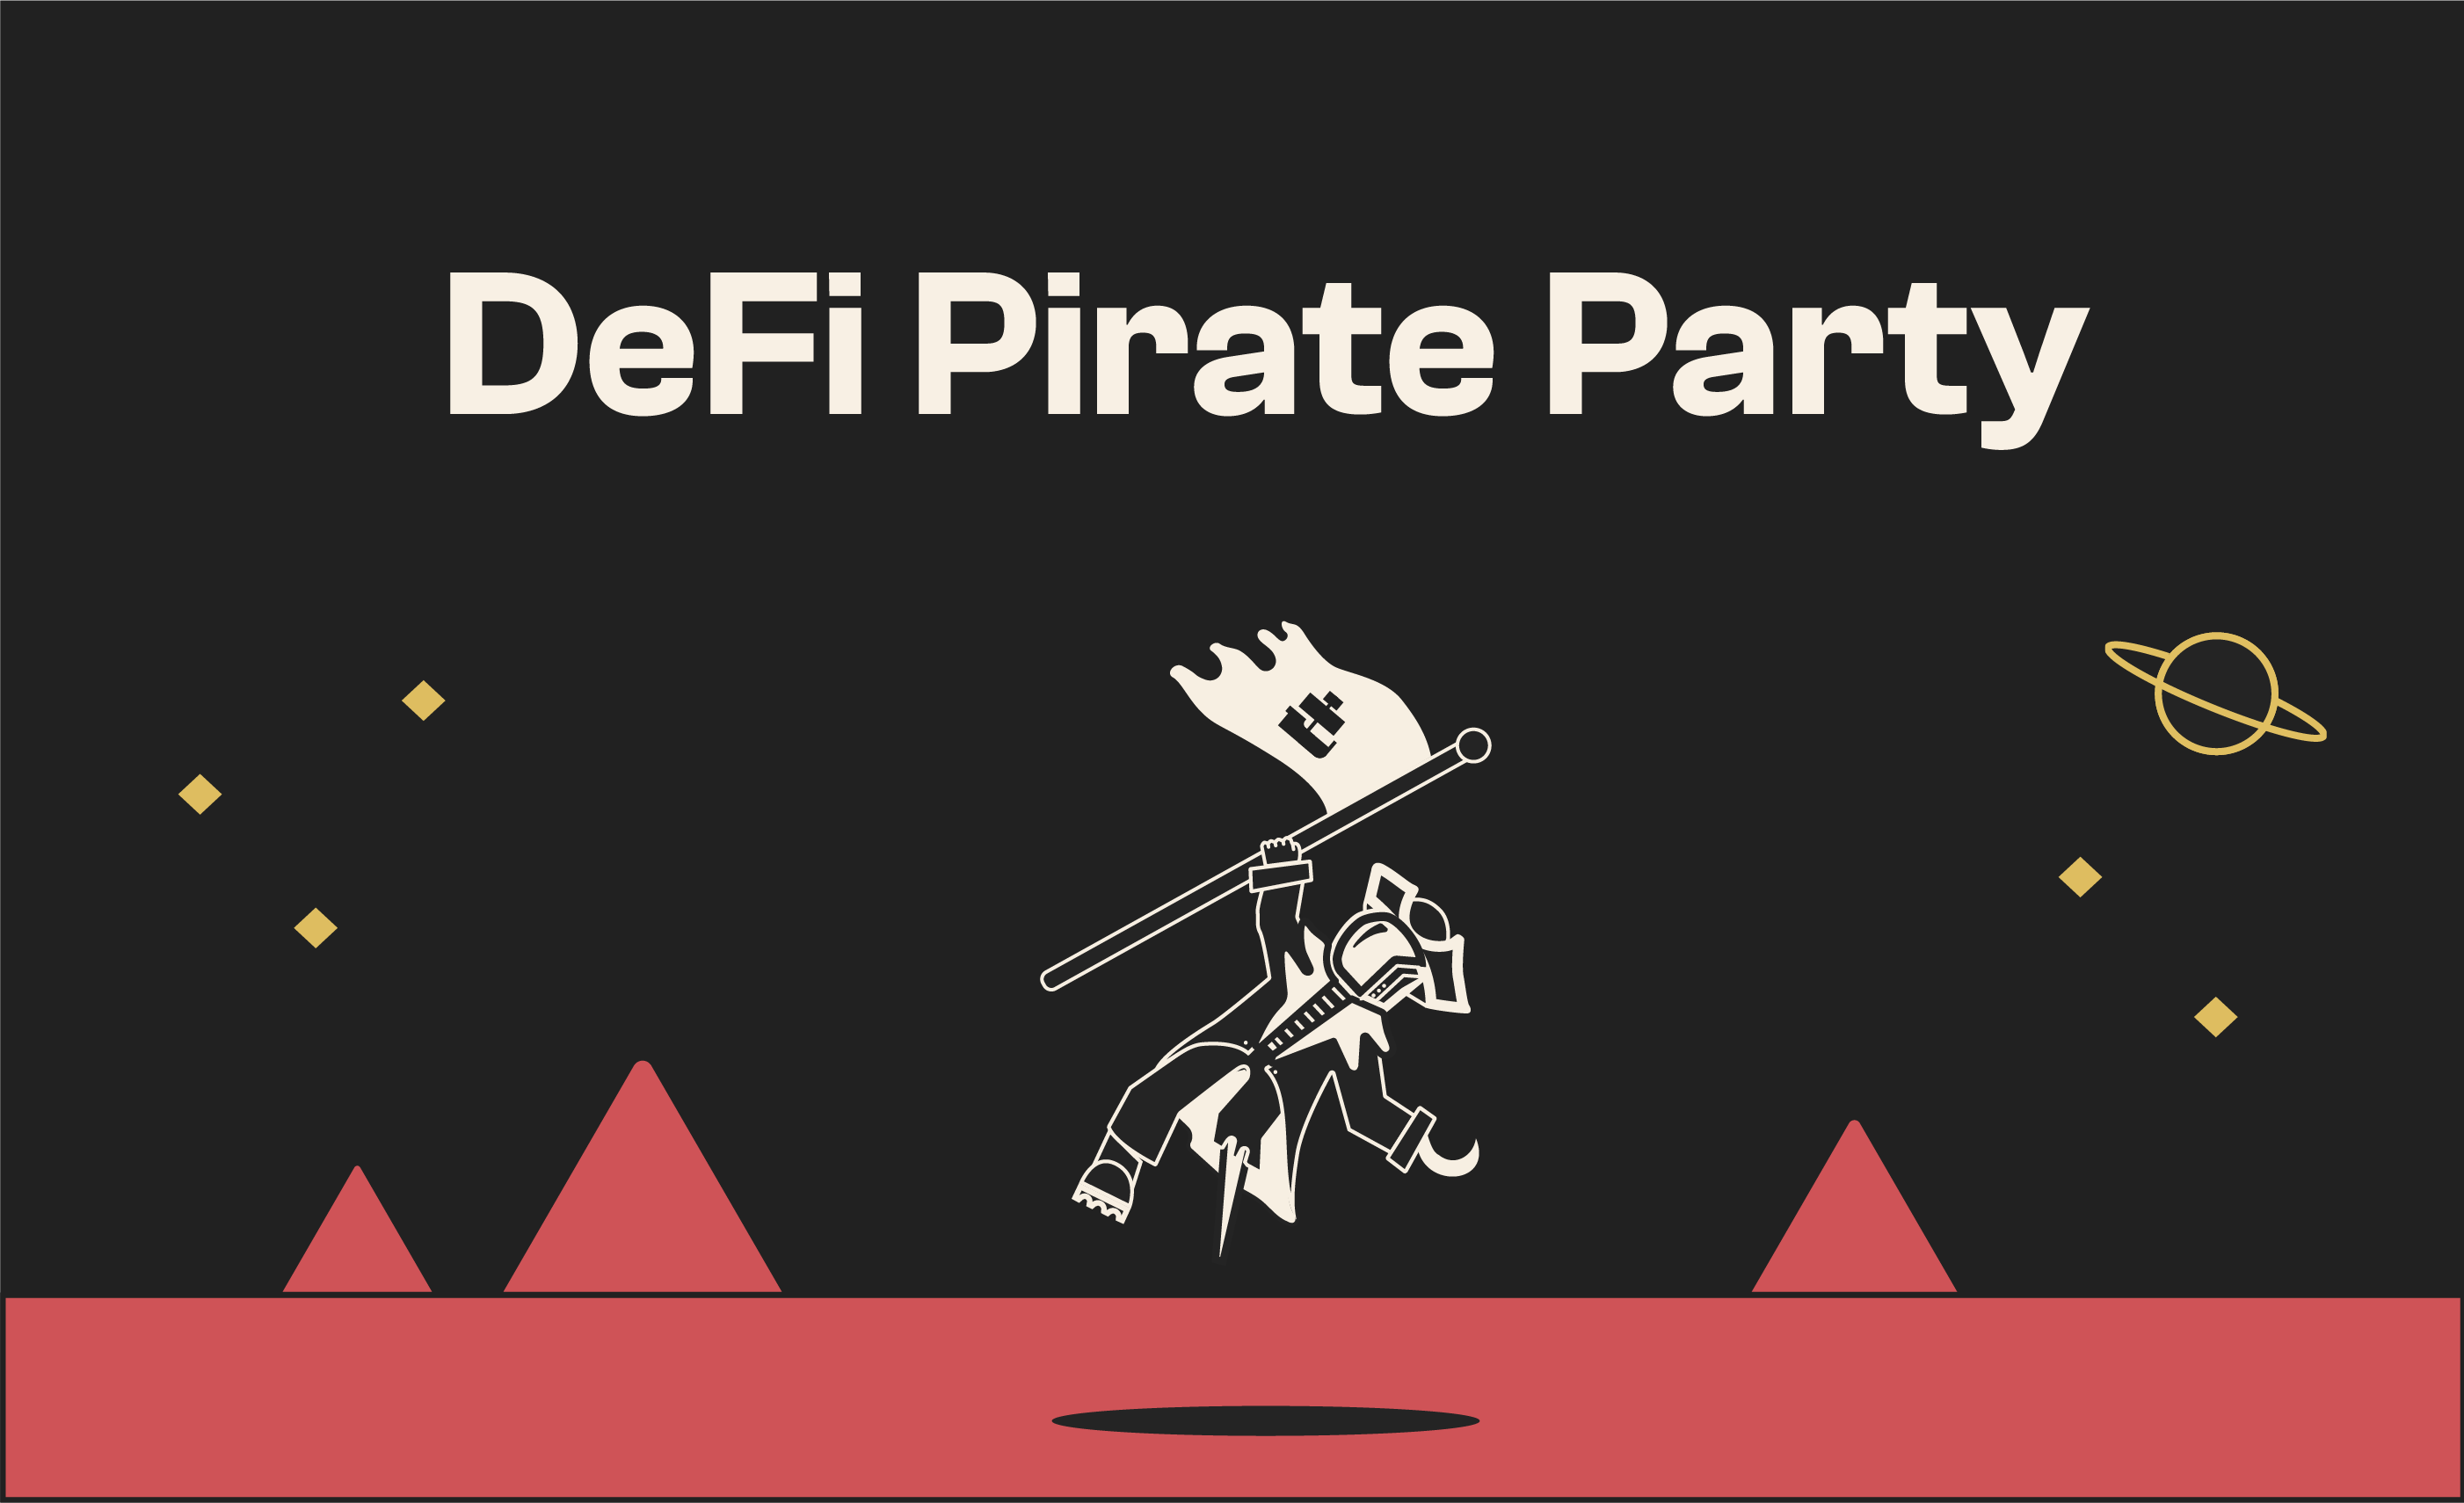 NYC DeFi Pirate Party was a Blast!